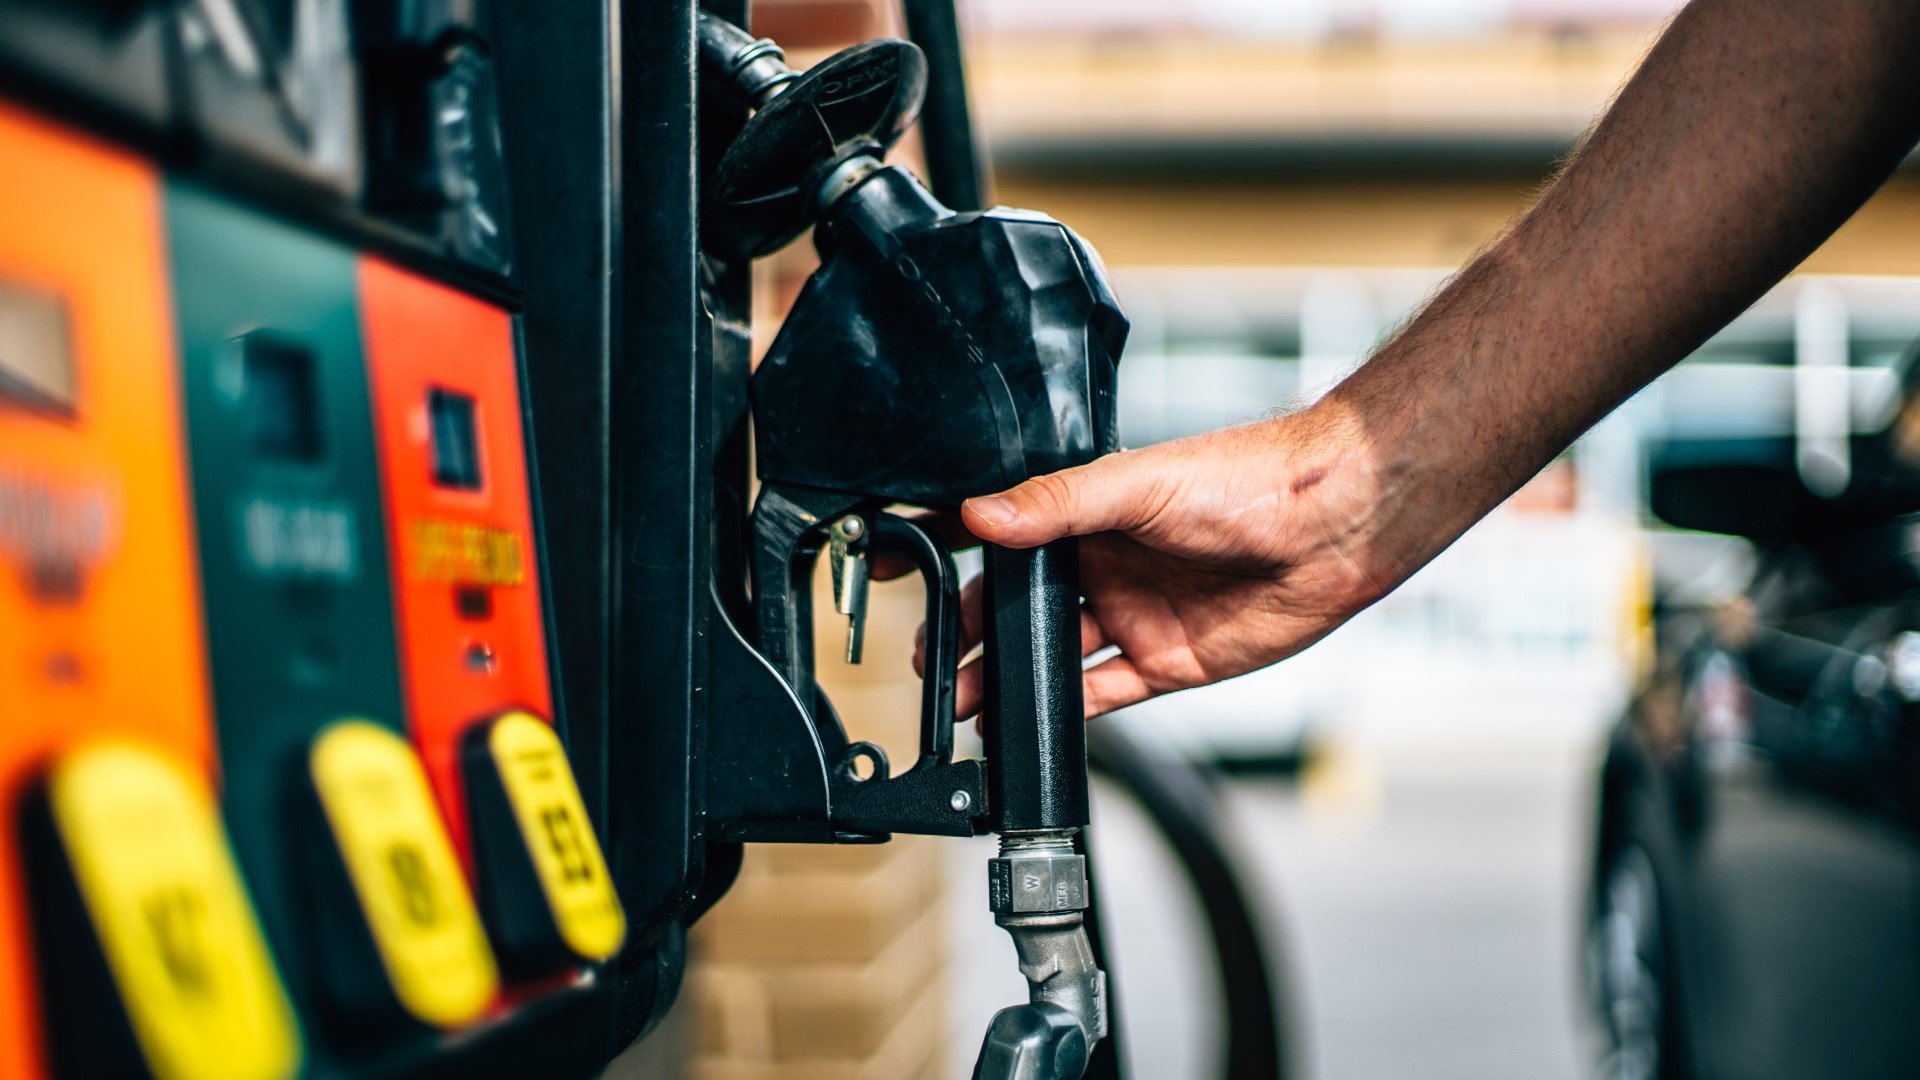 Paying attention at the pump lately? Those gas prices are rising, and sounds like the pain at the pump could continue.